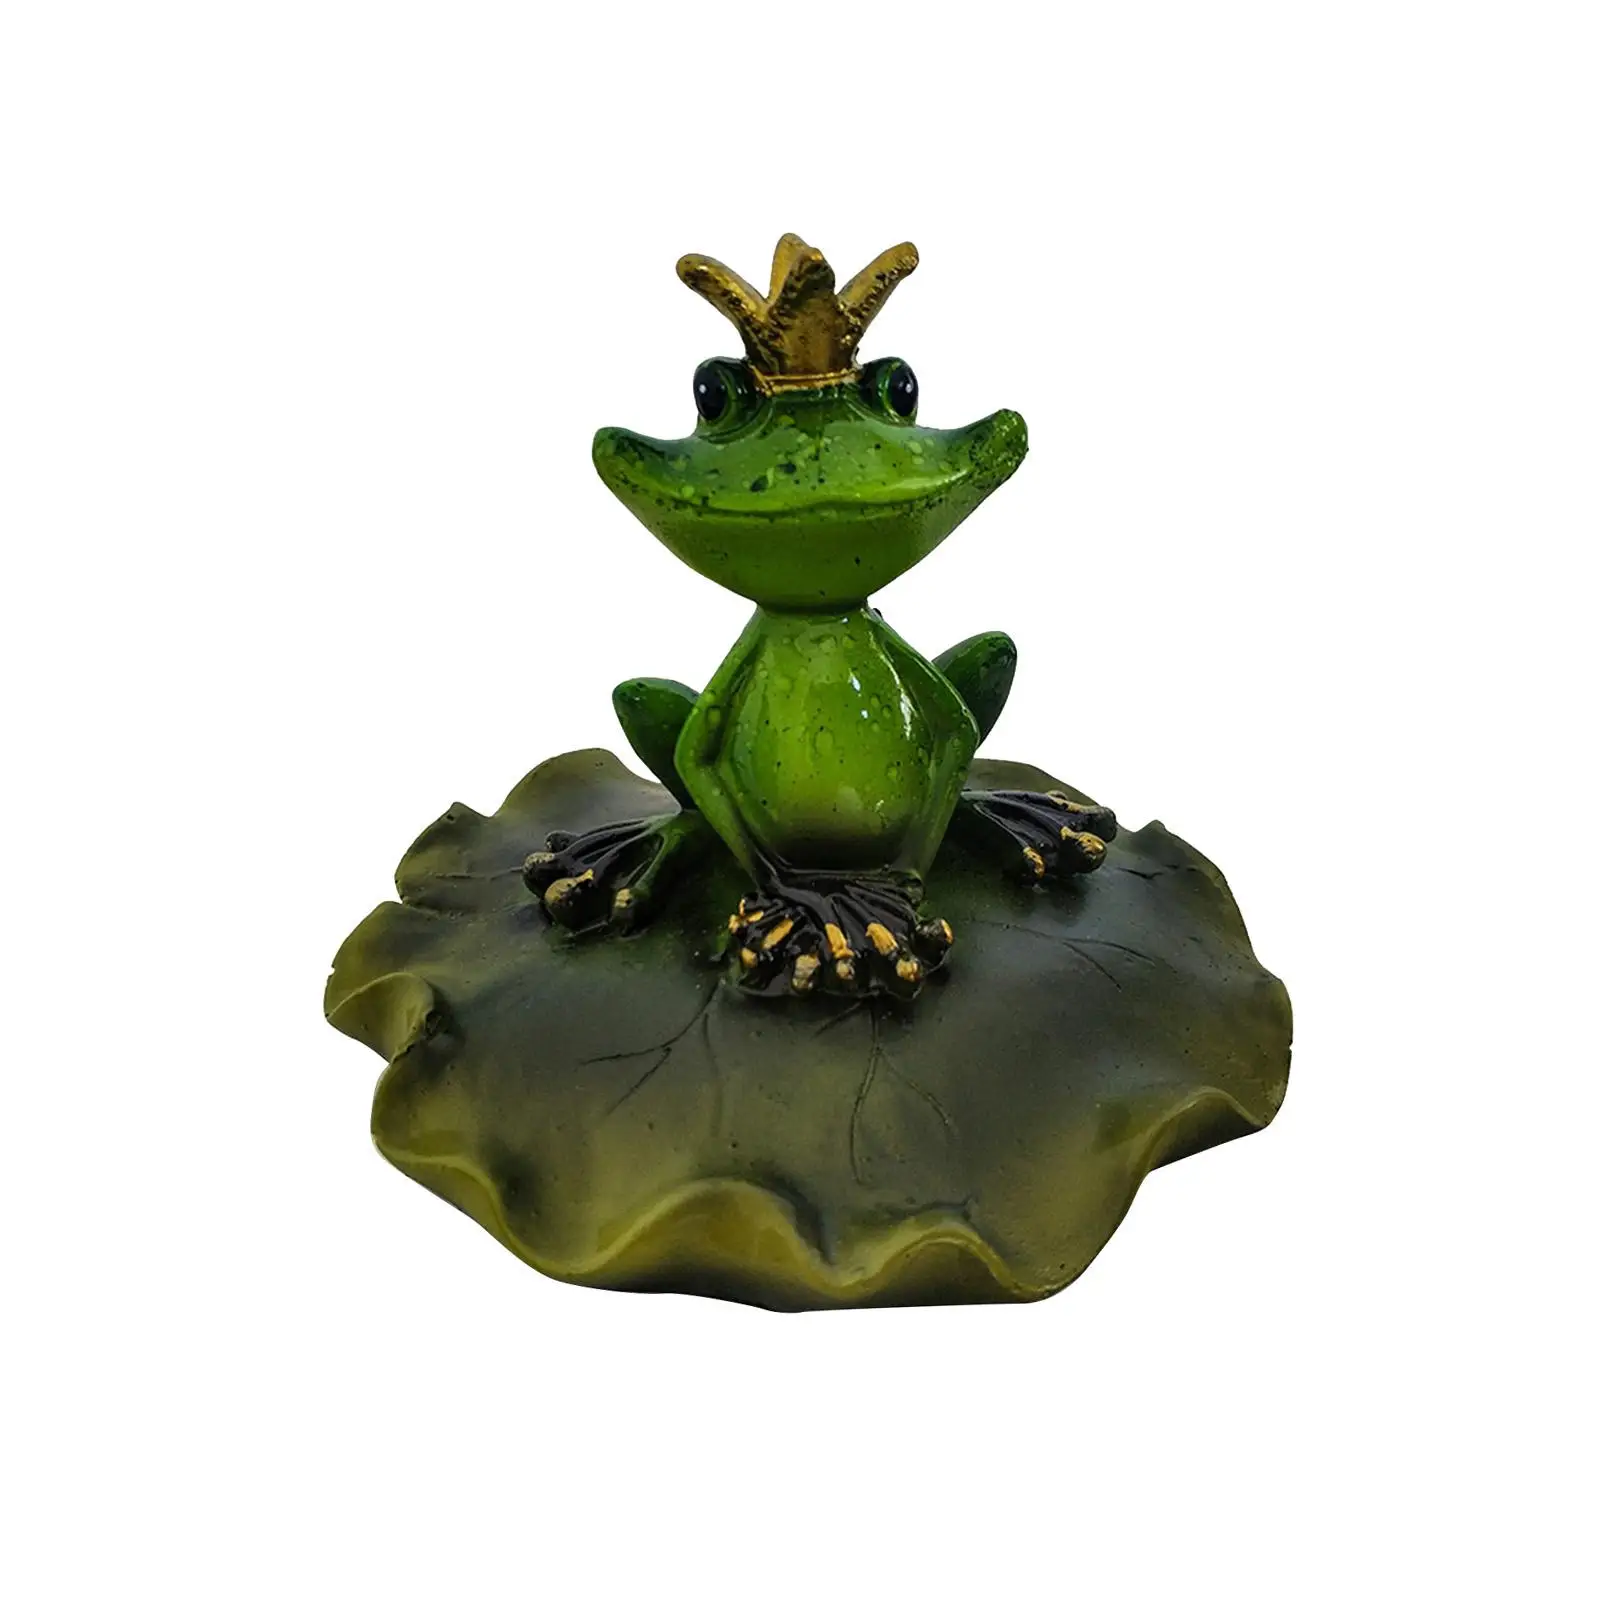 Realistic Water Floating Frog Craft Simulation Frog Statues Garden Pond Decor for Pond Garden Landscaping Accessories Decoration